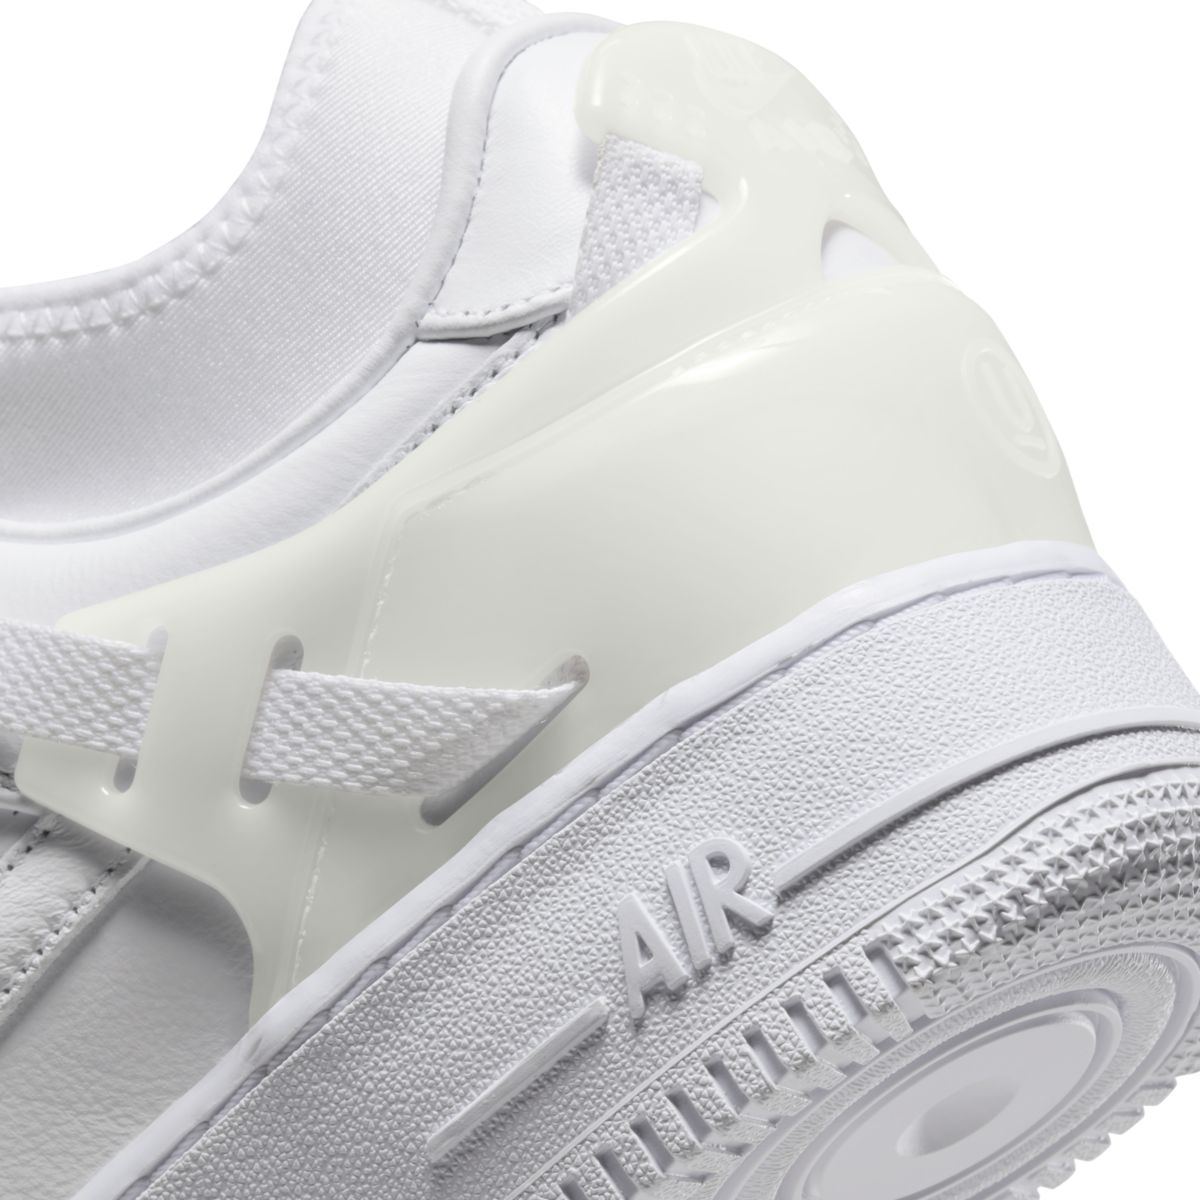 Undercover x Nike Air Force 1 Low White DQ7558-101 7